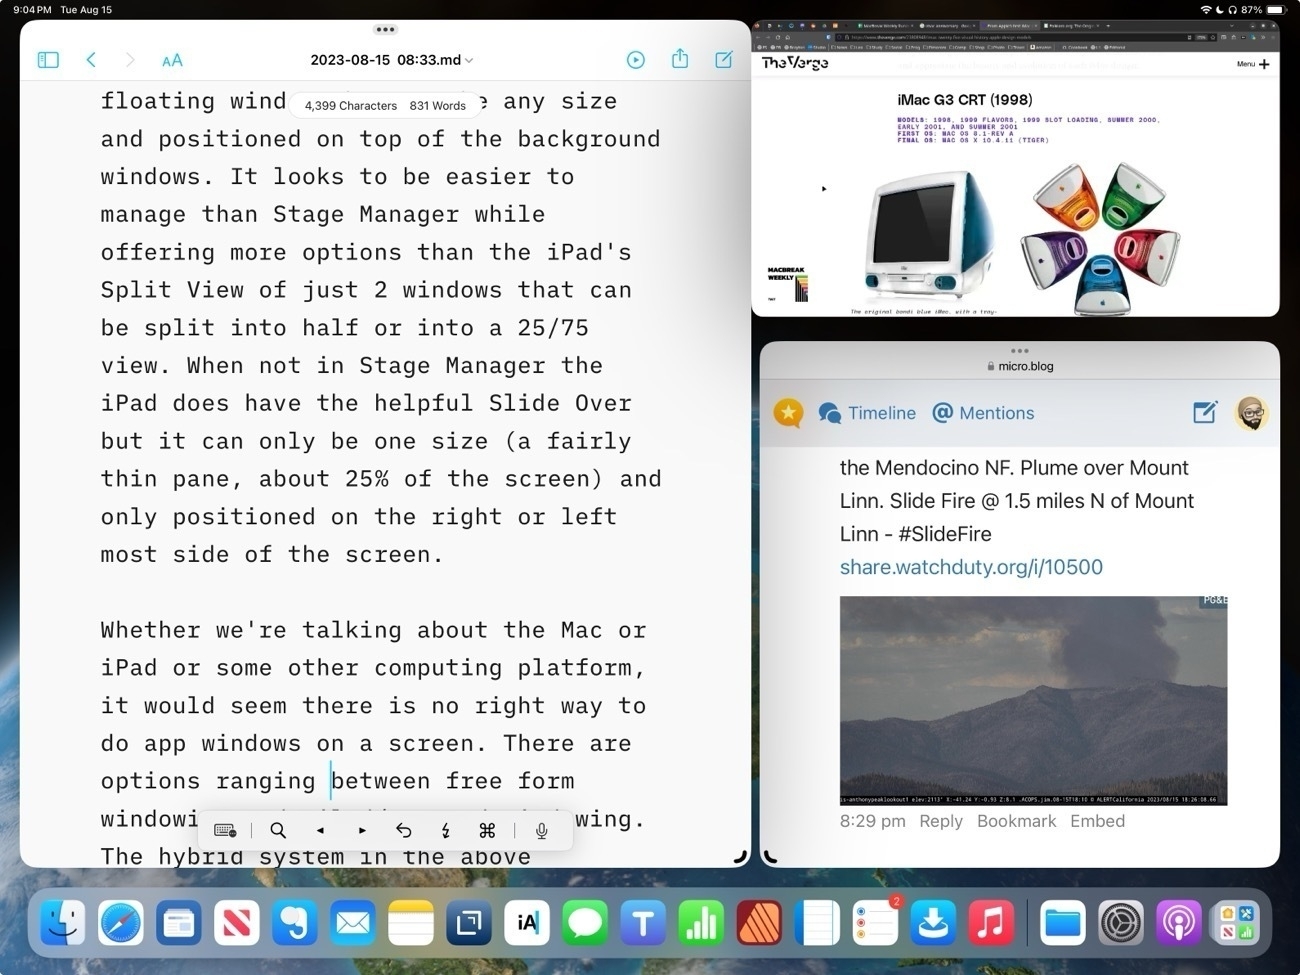 A screenshot of 3 windows in Stage Manager on the iPad Pro